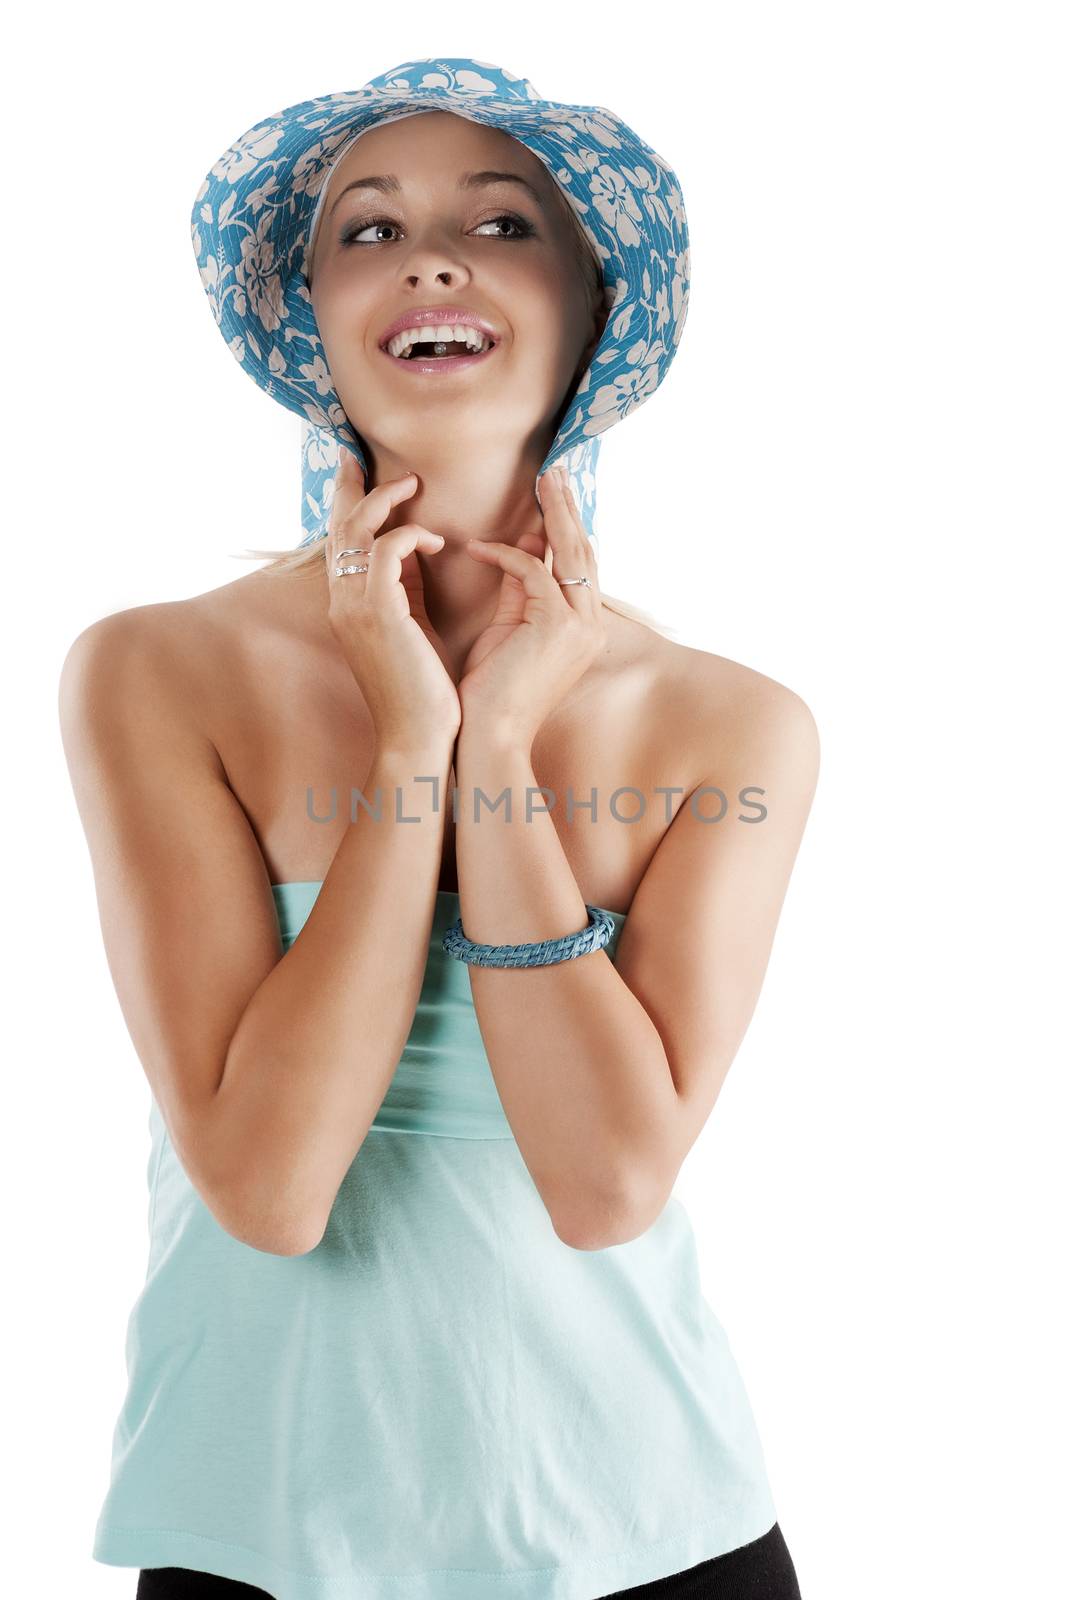 happy smiling woman in summer dress with fower hat looking